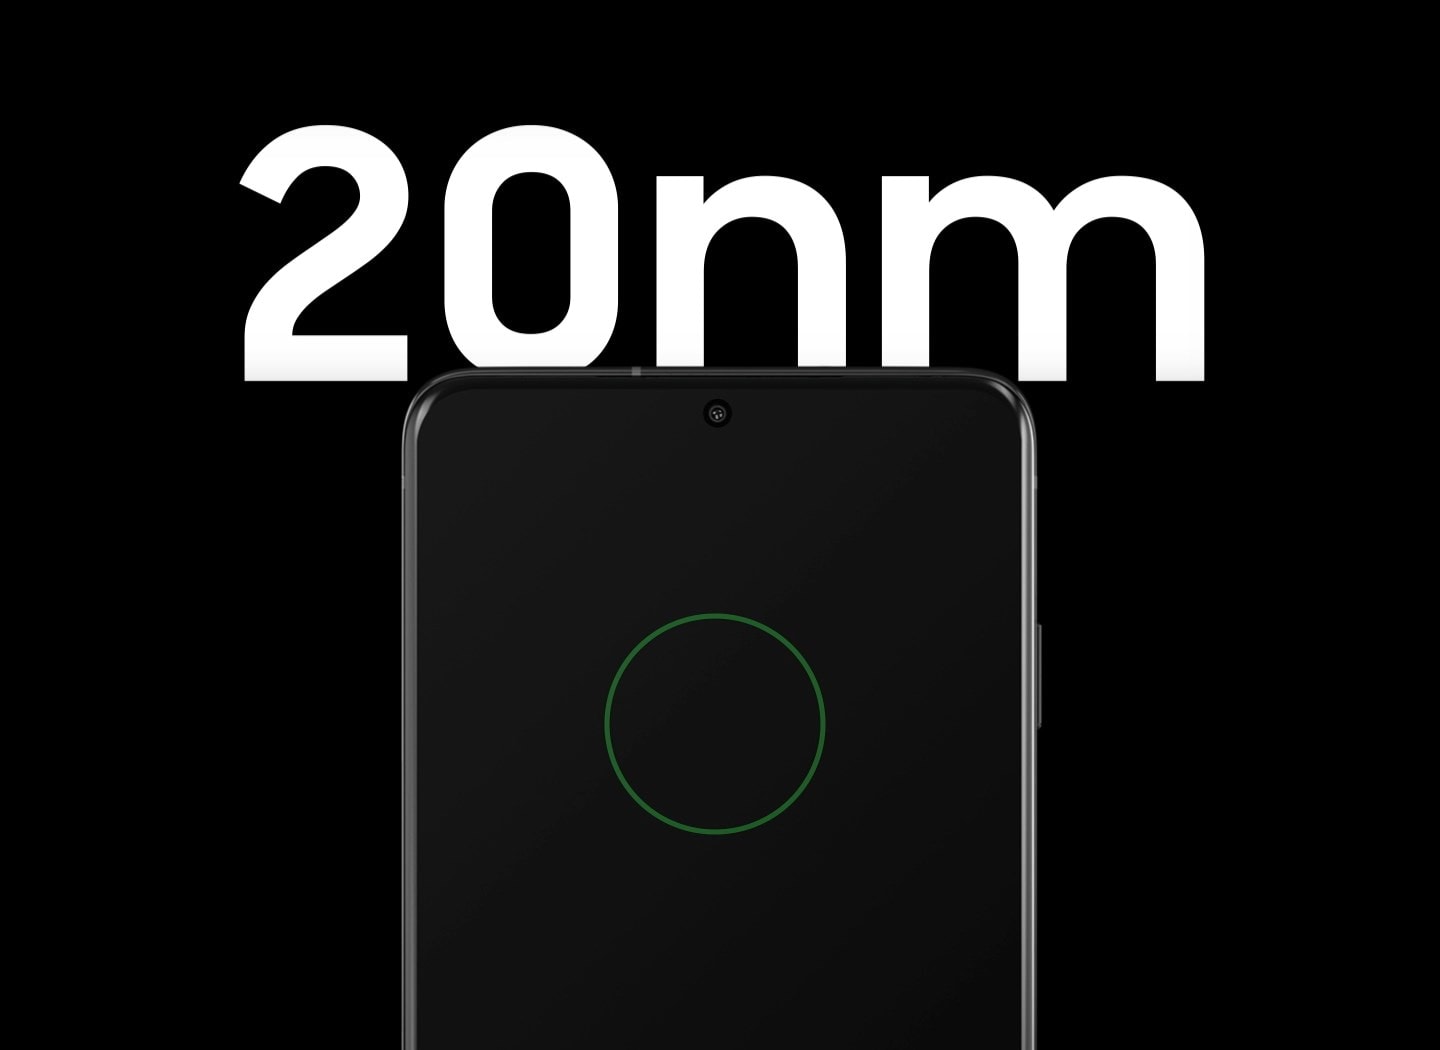 The green circle flickers at 20nm and then the number gradually decreases to 5nm, and the green cirle lights up and glows, expressing excellent power efficiency.